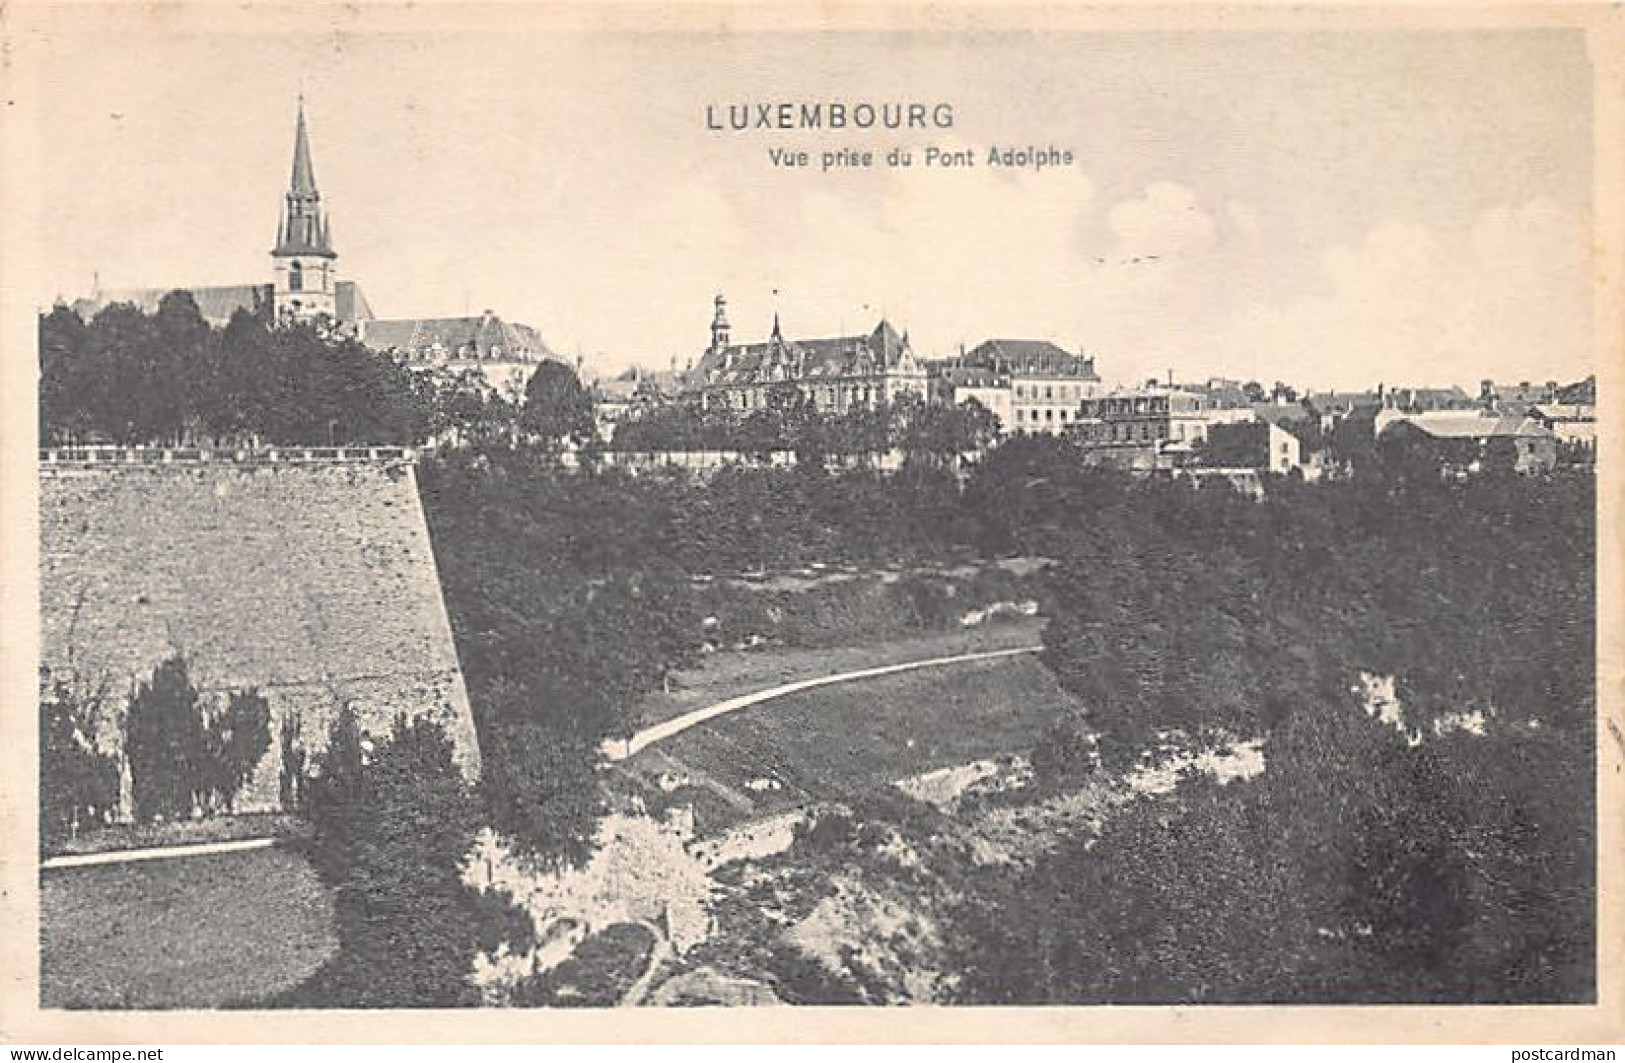 LUXEMBOURG-VILLE - Vue Prise Du Pont Adolphe - Ed. Dr. Trenkler Co. Lux. 26 - Luxembourg - Ville